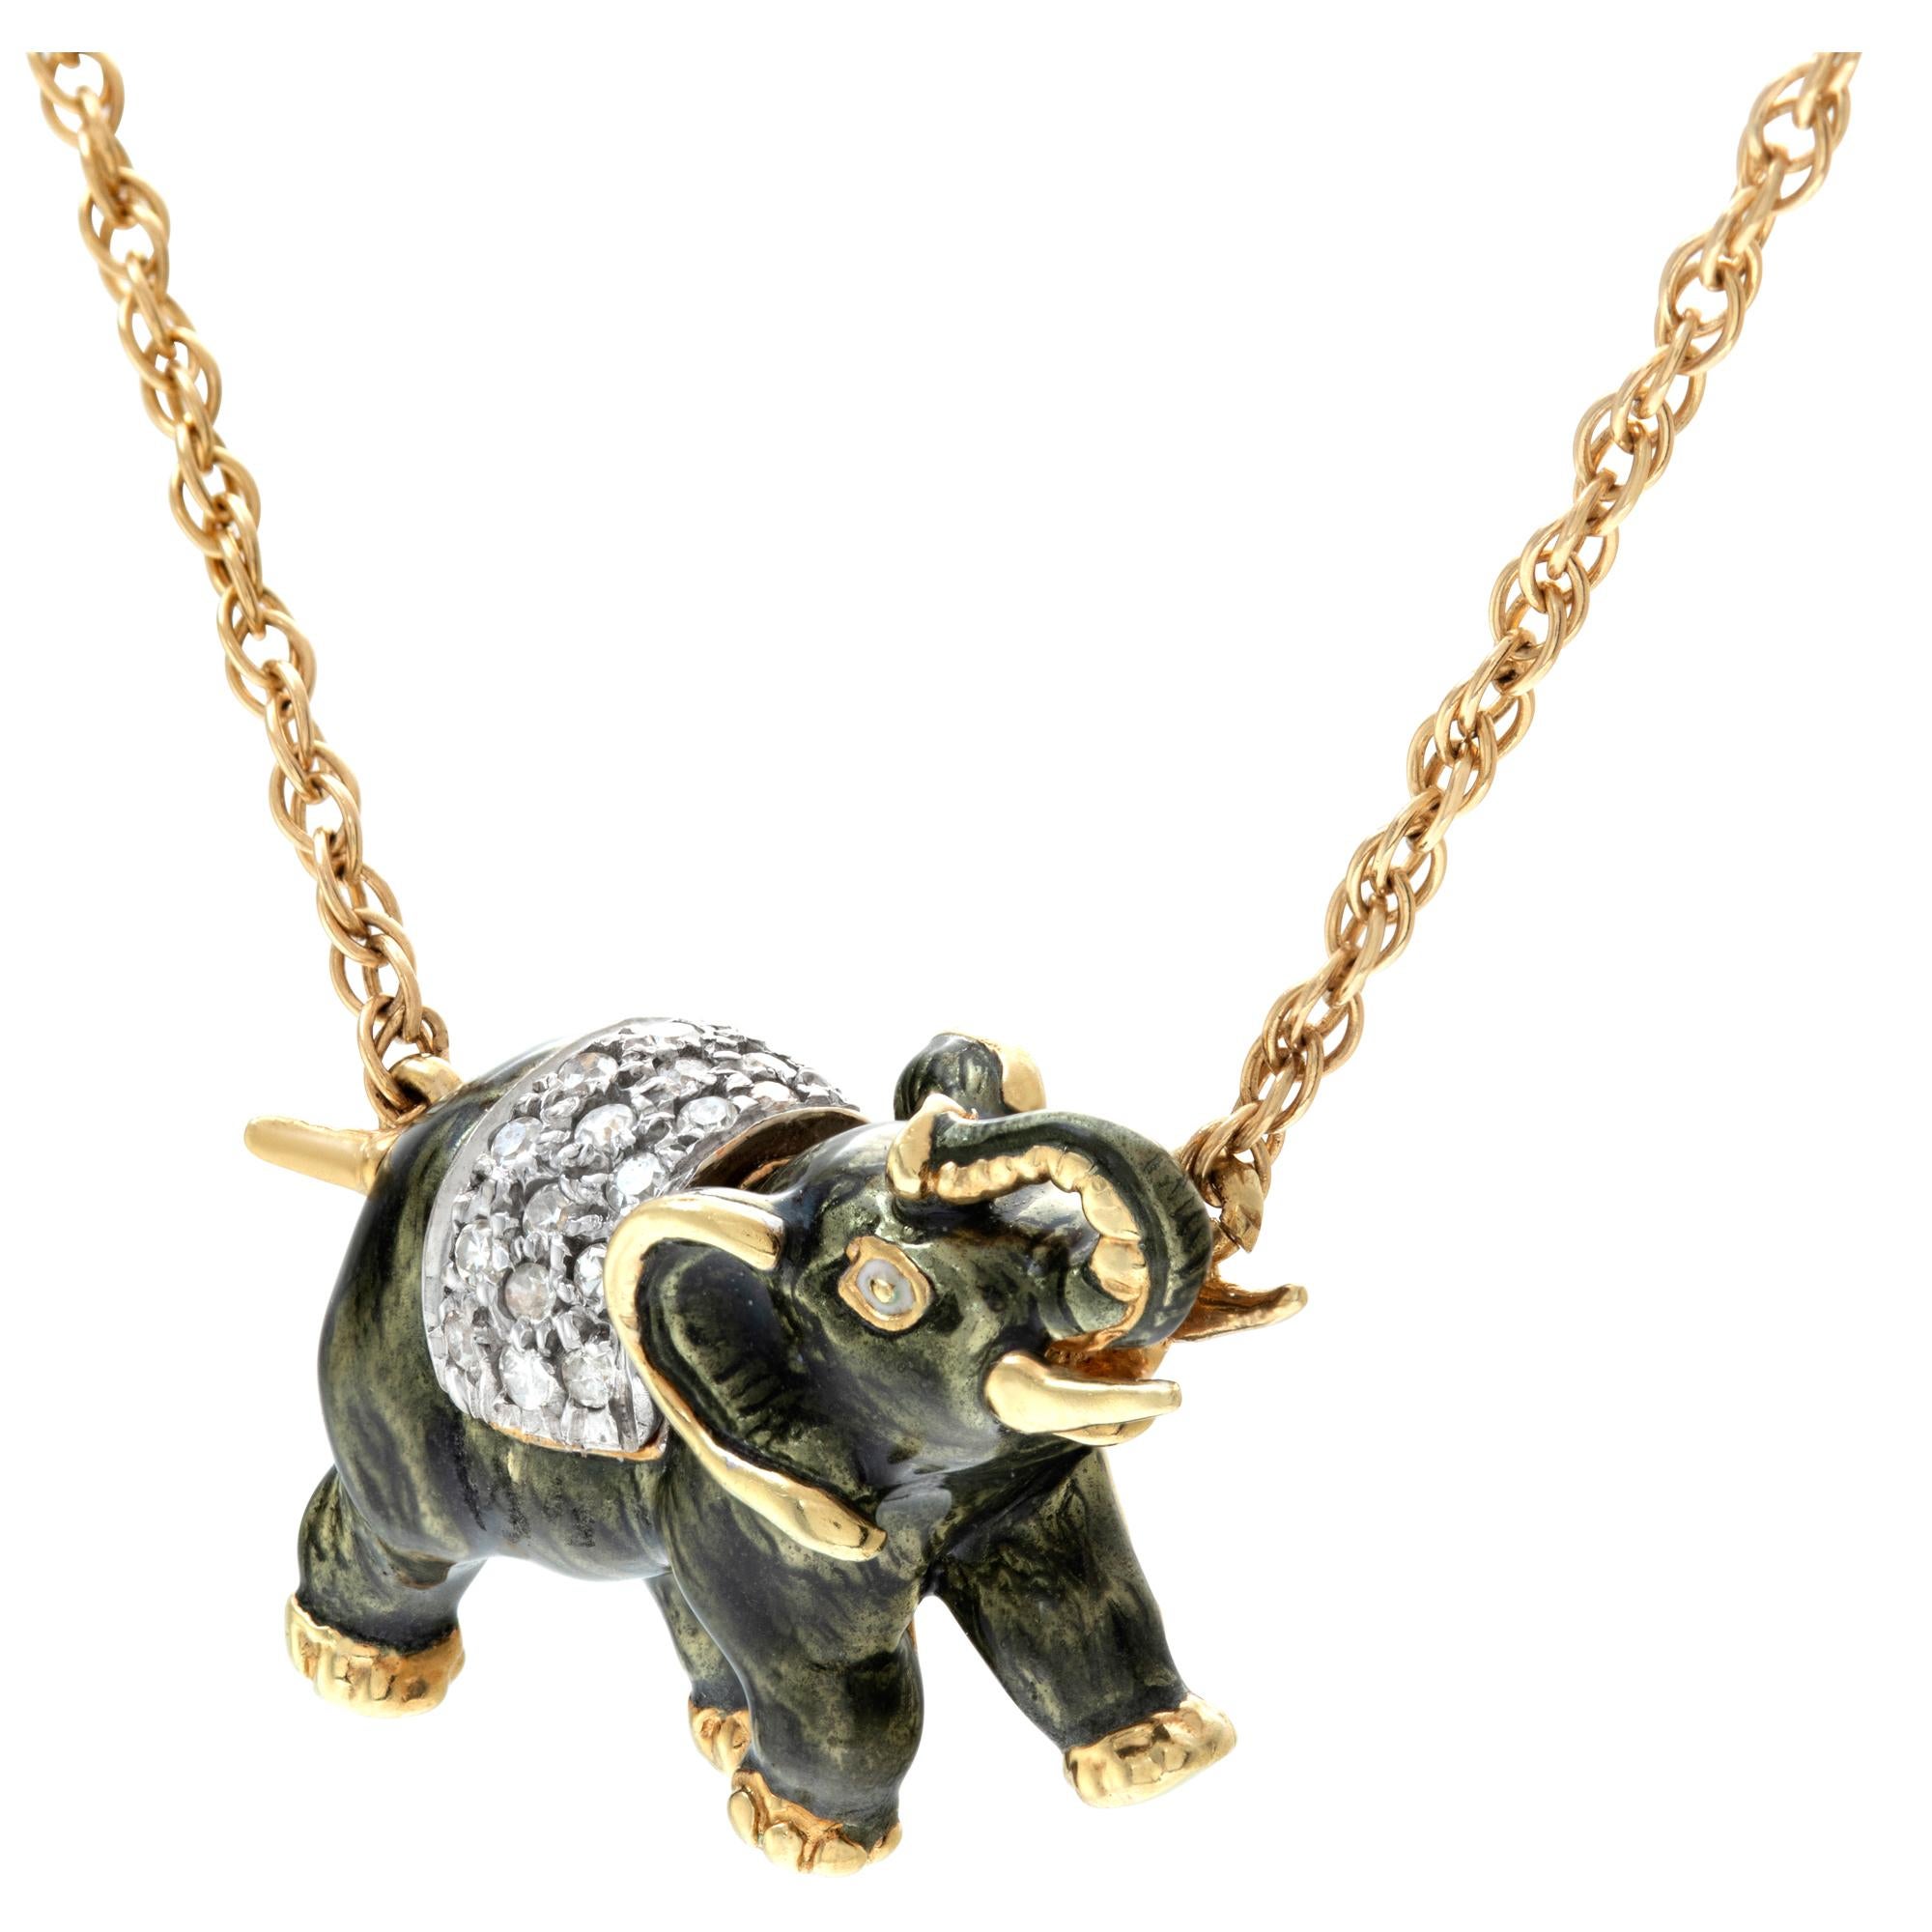 Elephant necklace in 14k gold with 0.25 carats in diamond accents G-H color, In Excellent Condition For Sale In Surfside, FL